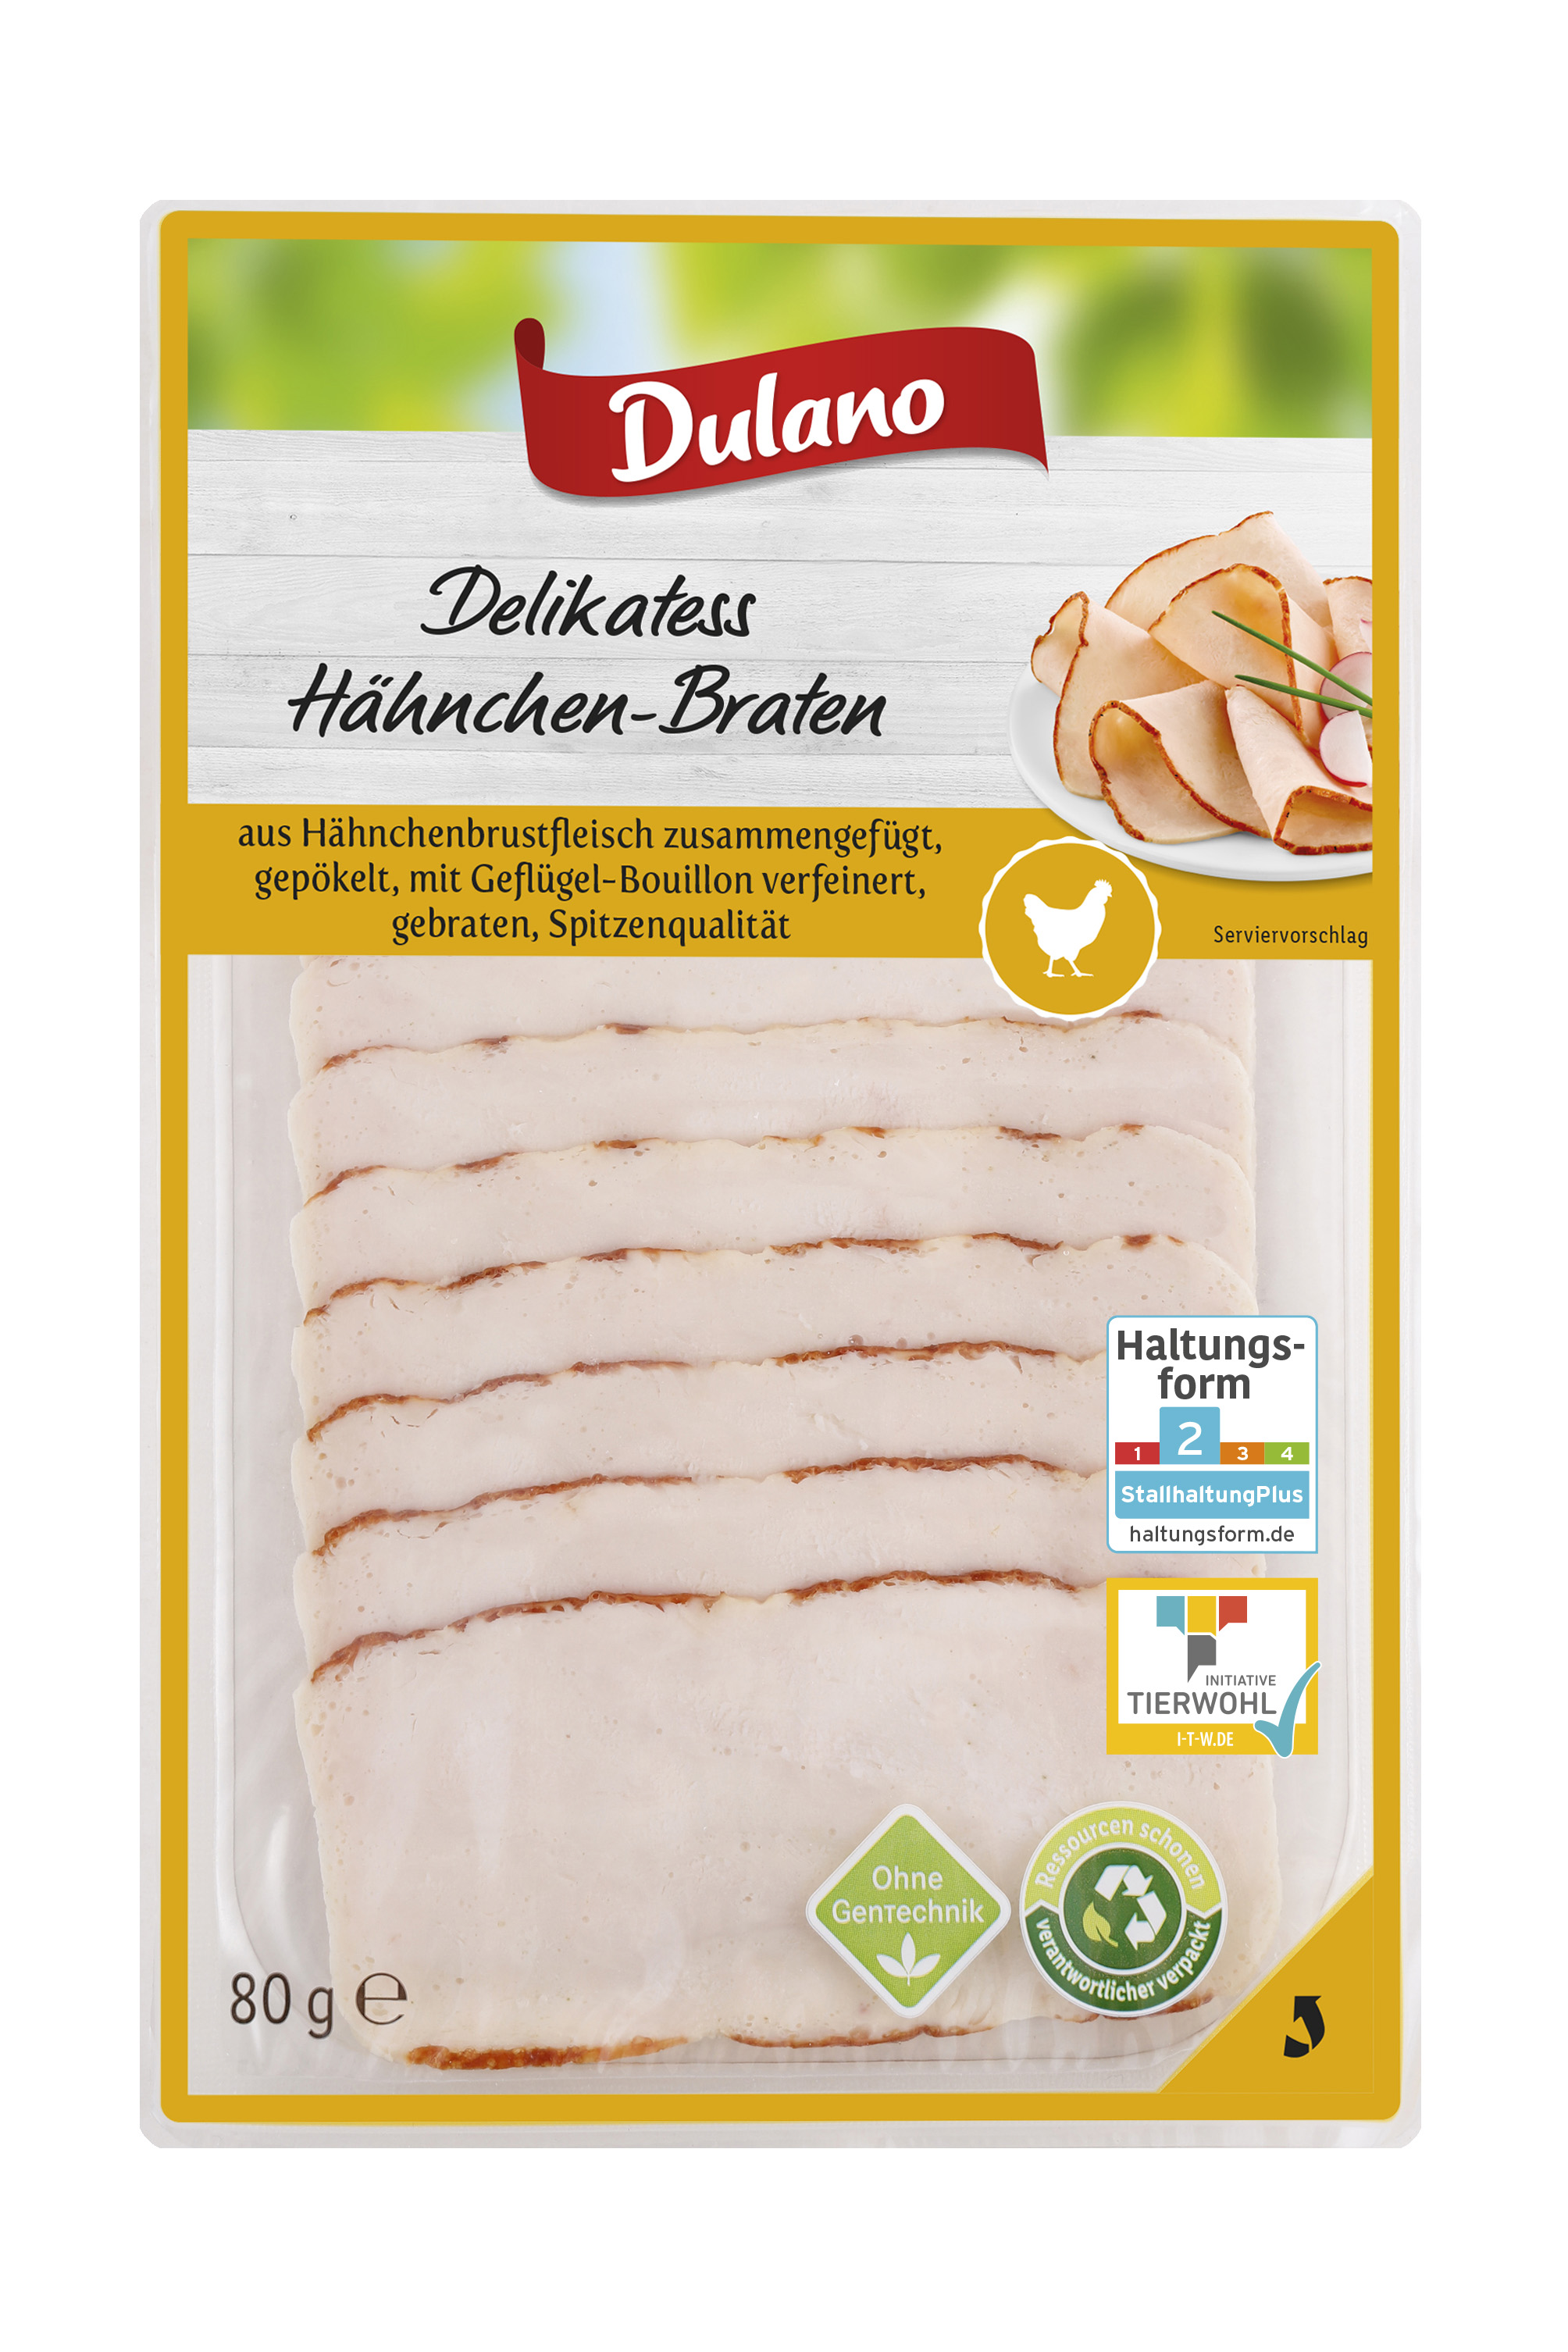 / Sausages Mühlen - Hähnchenbraten (80 - Prepared/Processed (Lidl) · mynetfair Gruppe Meat/Poultry Tobacco Sausages grams) · Beverage Prepared/Processed Markenvertriebs Food Dulano zur / Meat/Poultry/Sausages Chicken GmbH